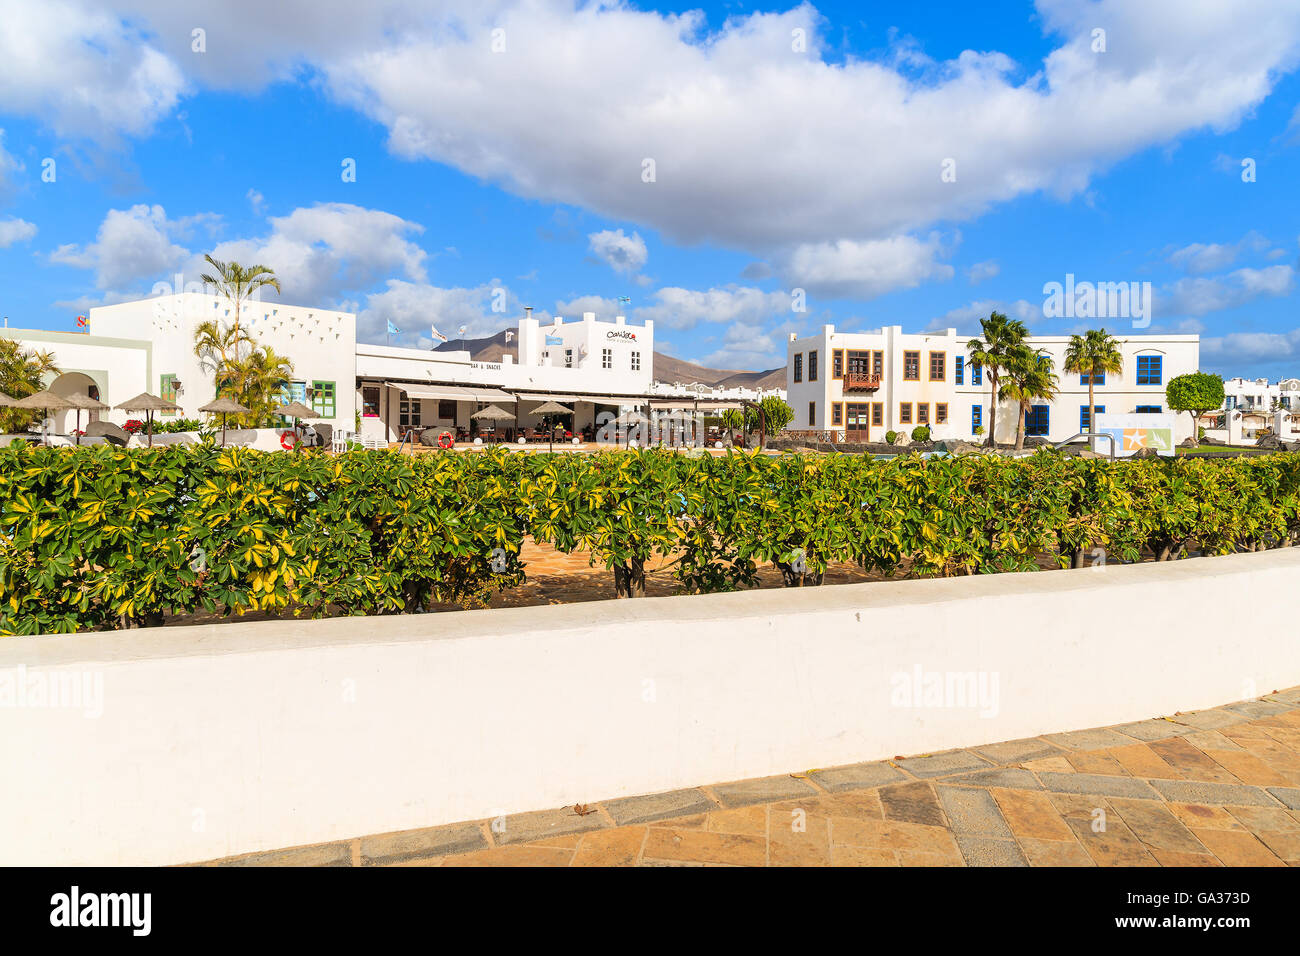 PLAYA BLANCA, LANZAROTE ISLAND - JAN 17, 2015: luxury apartment complex built in traditional Canary style on Lanzarote island. Canary Islands are popular holiday destination. Stock Photo